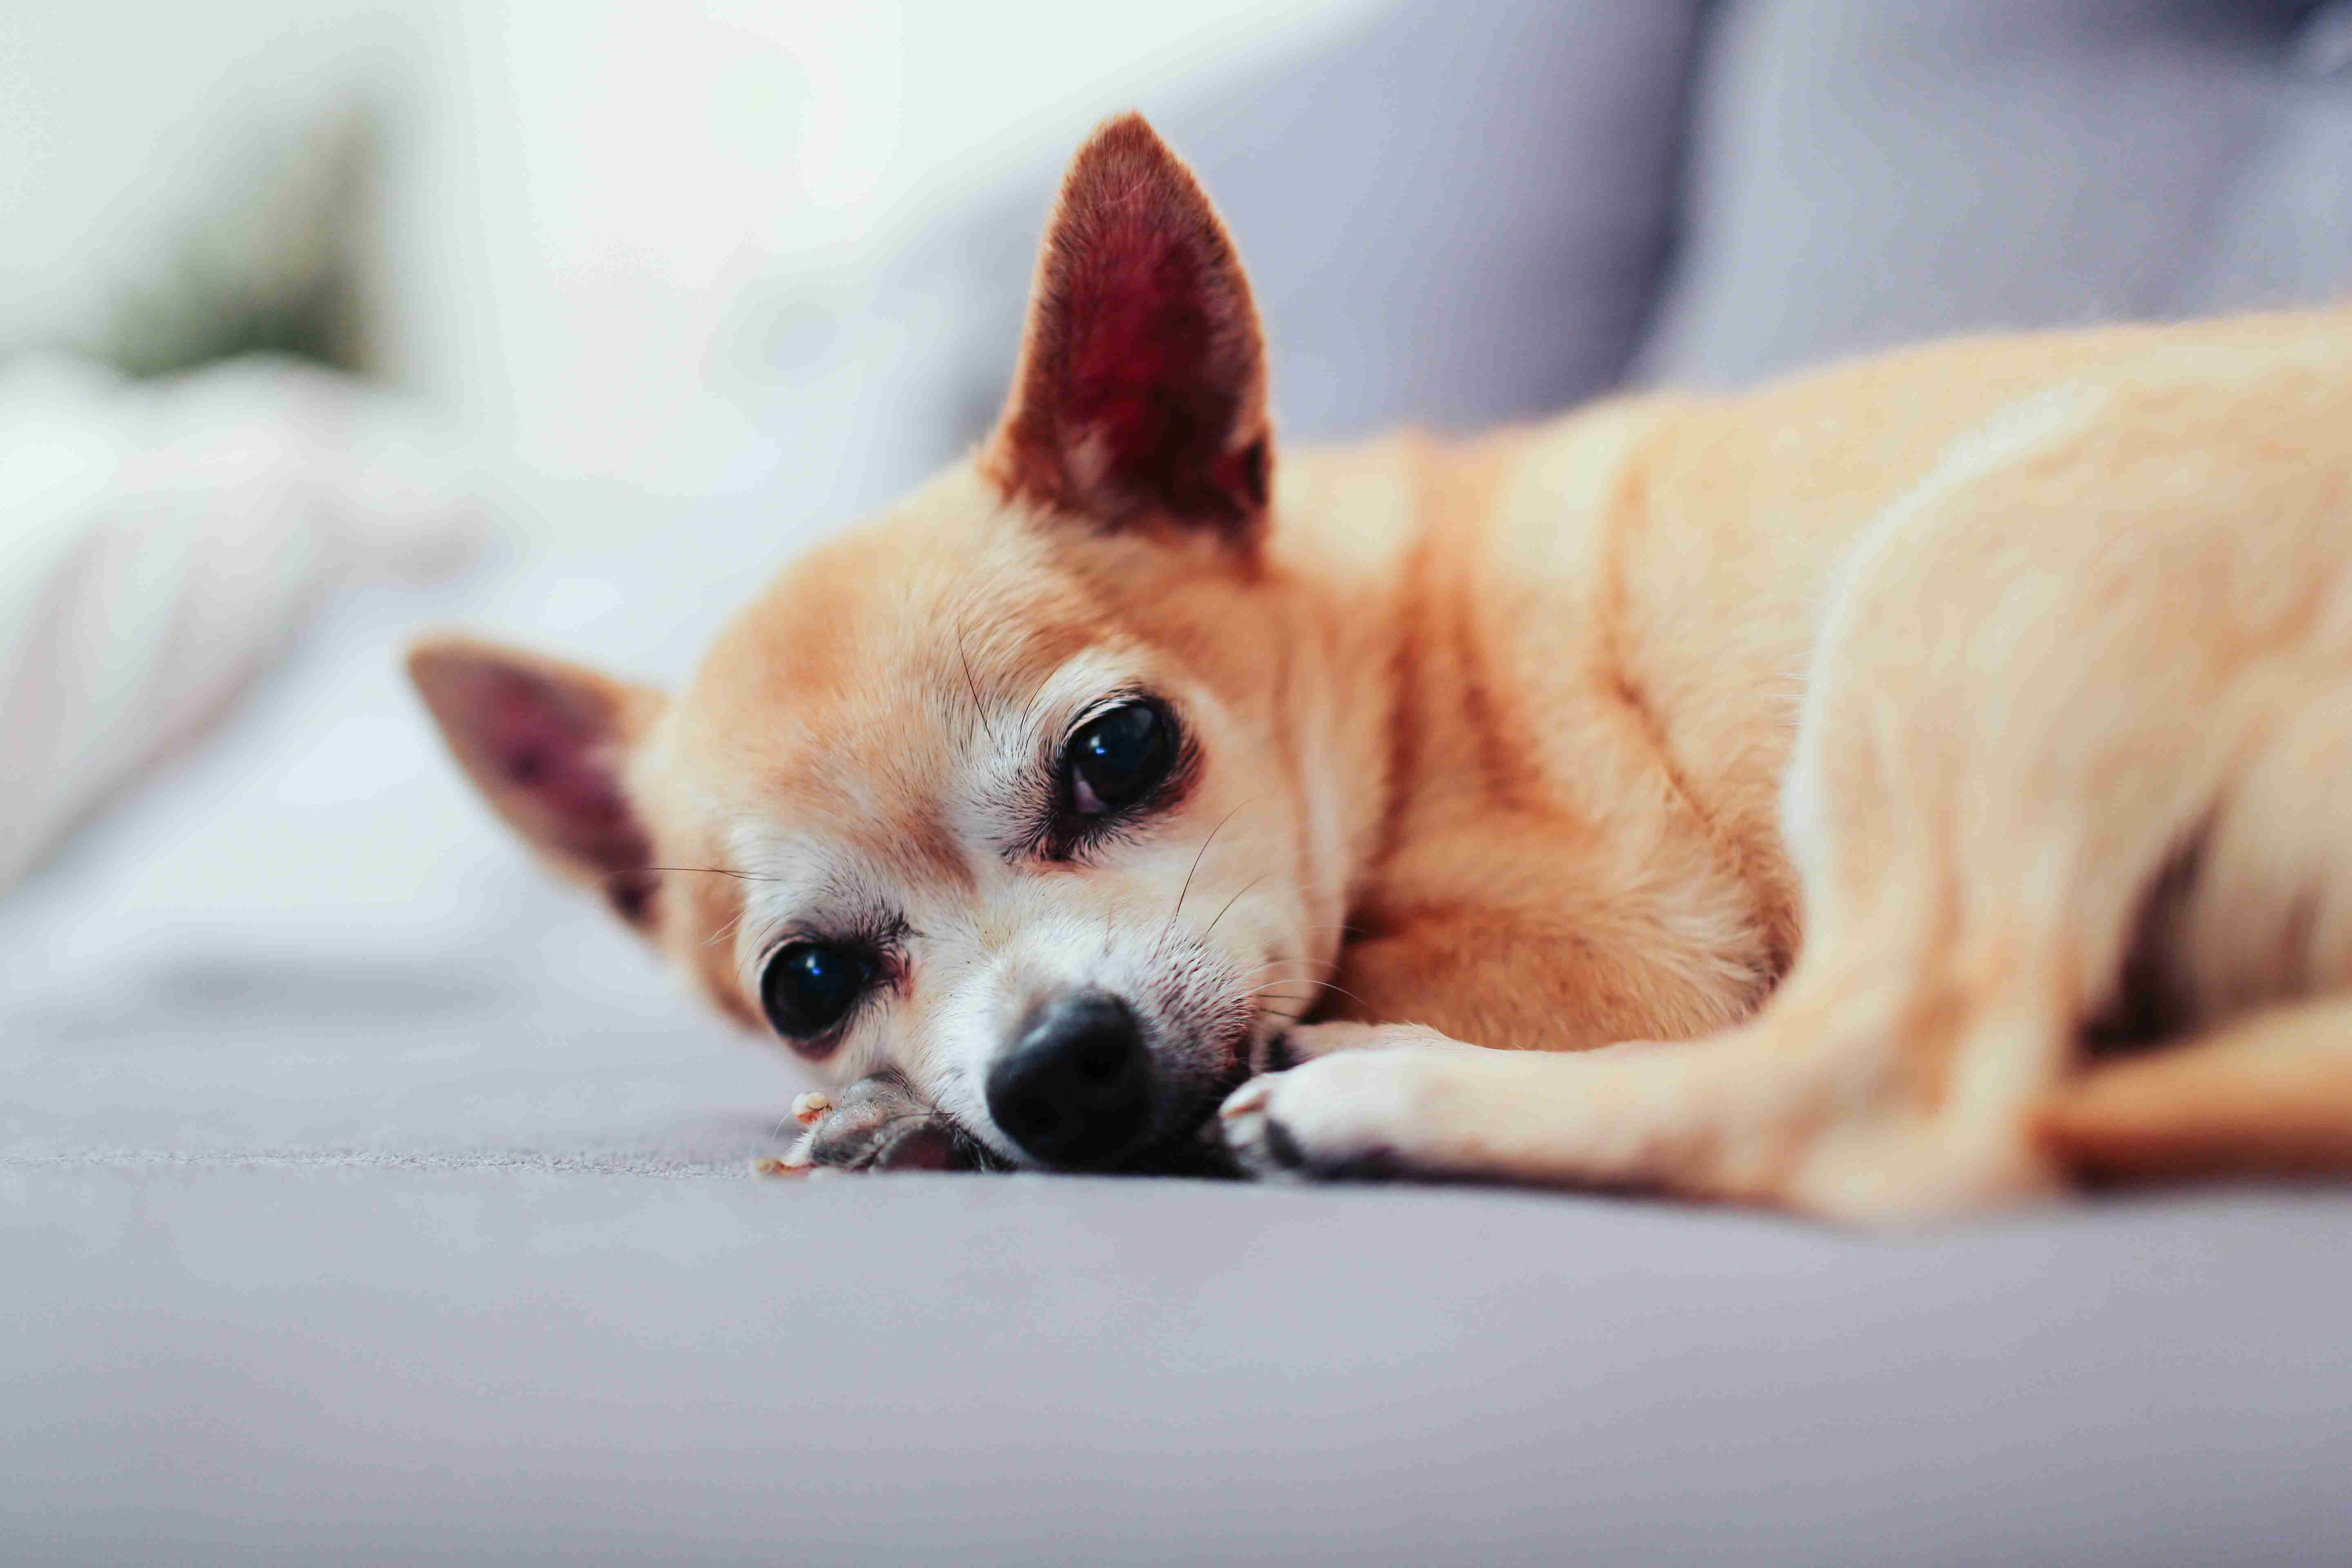 Are there any warning signs that a Chihuahua is about to become aggressive due to anger?